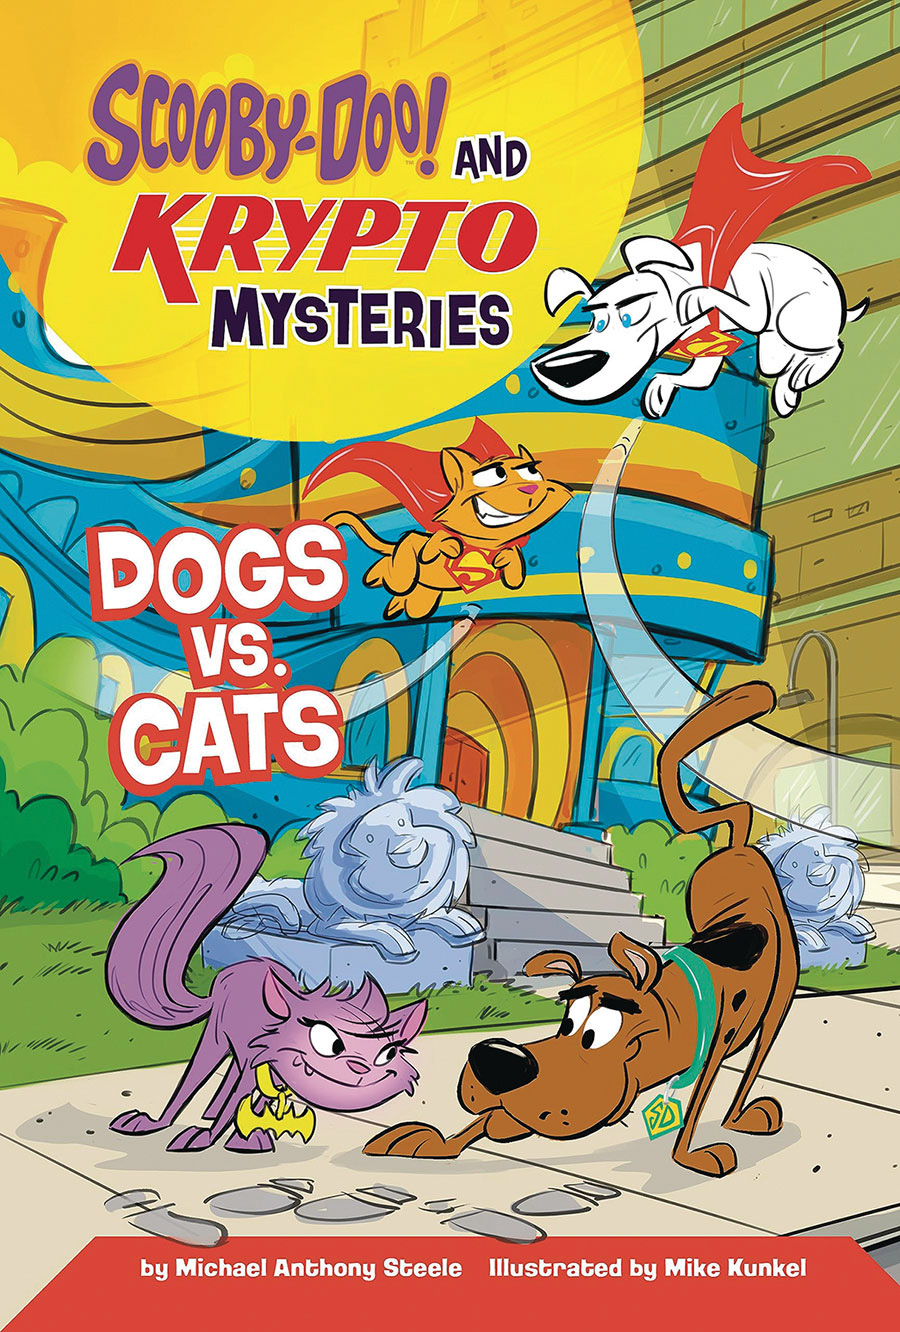 Scooby-Doo And Krypto Mysteries Dogs vs Cats TP